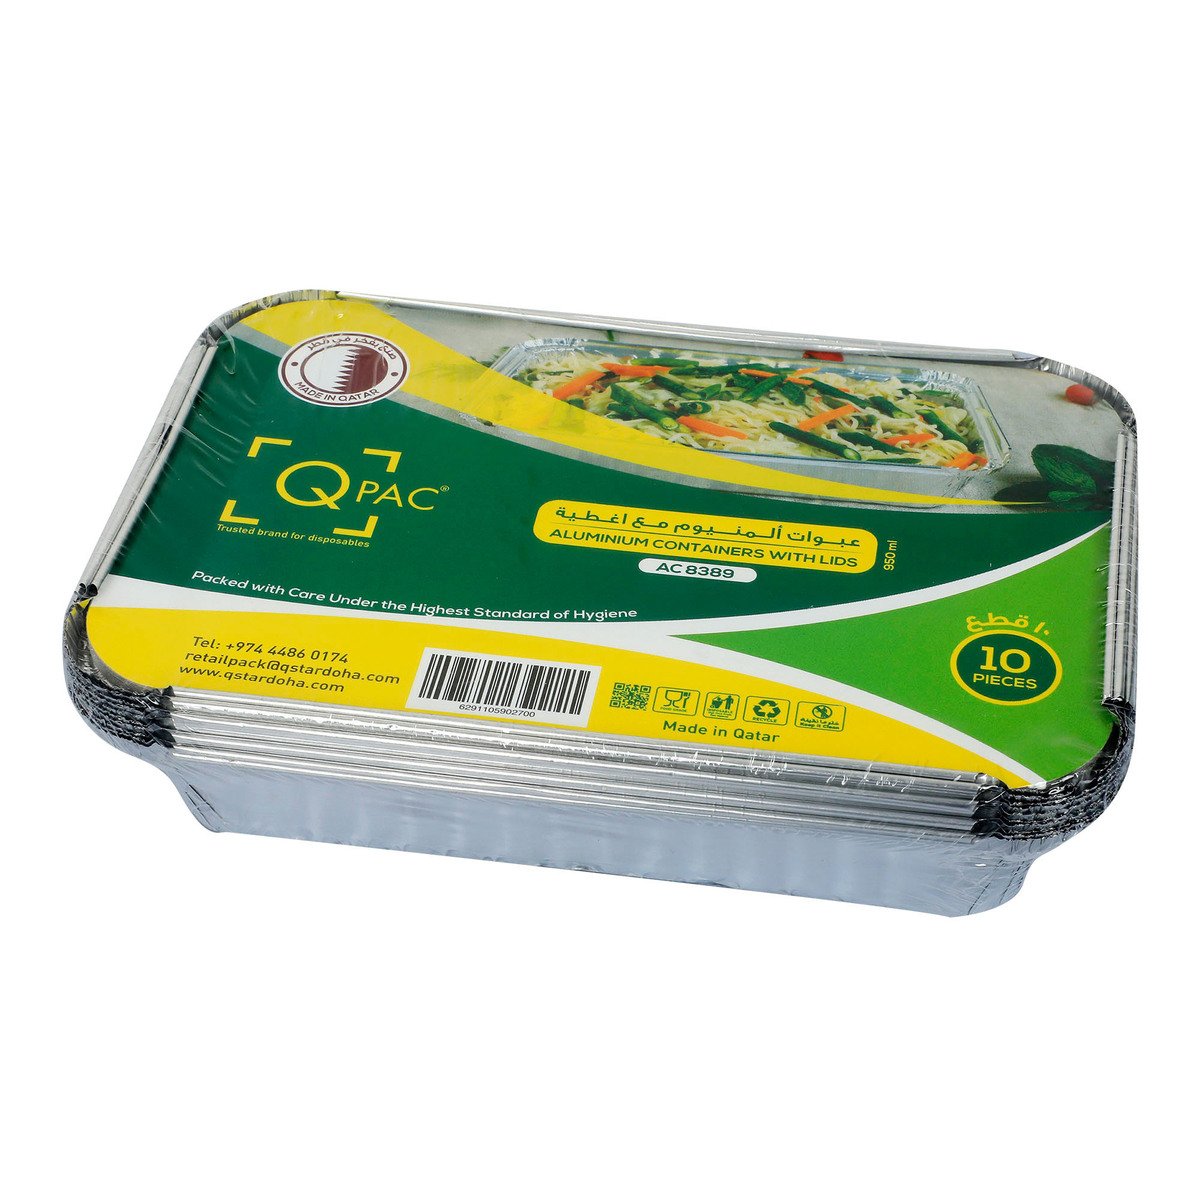 Qpac Aluminium Containers With Lids AC 8389 3 x 10pcs